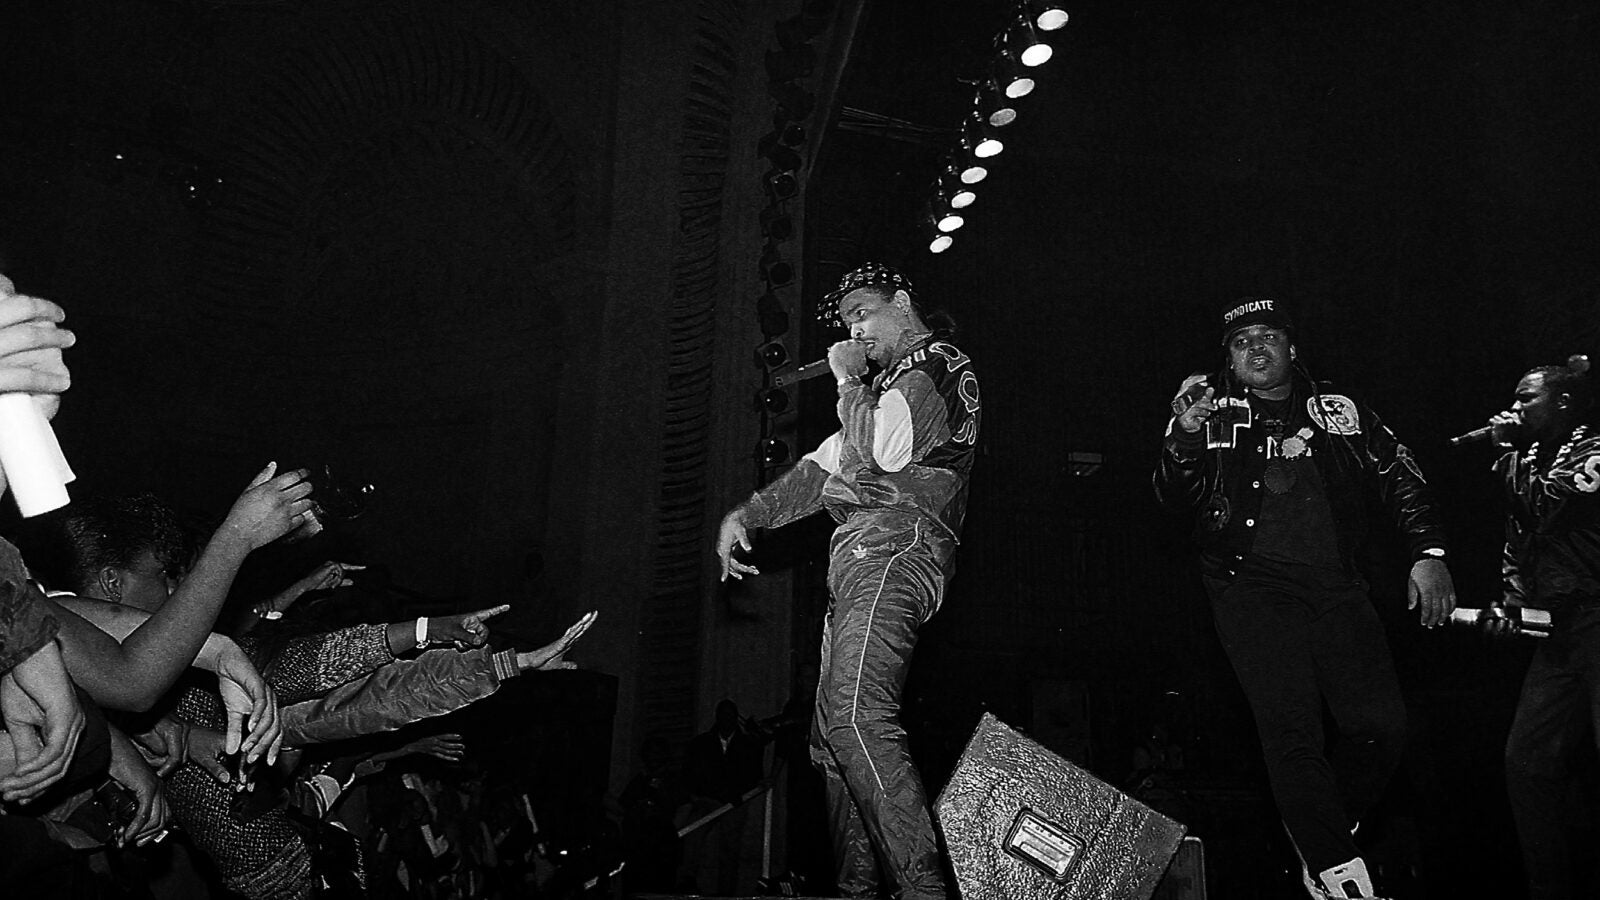 Ice T with microphone on stage in 1989 photo.